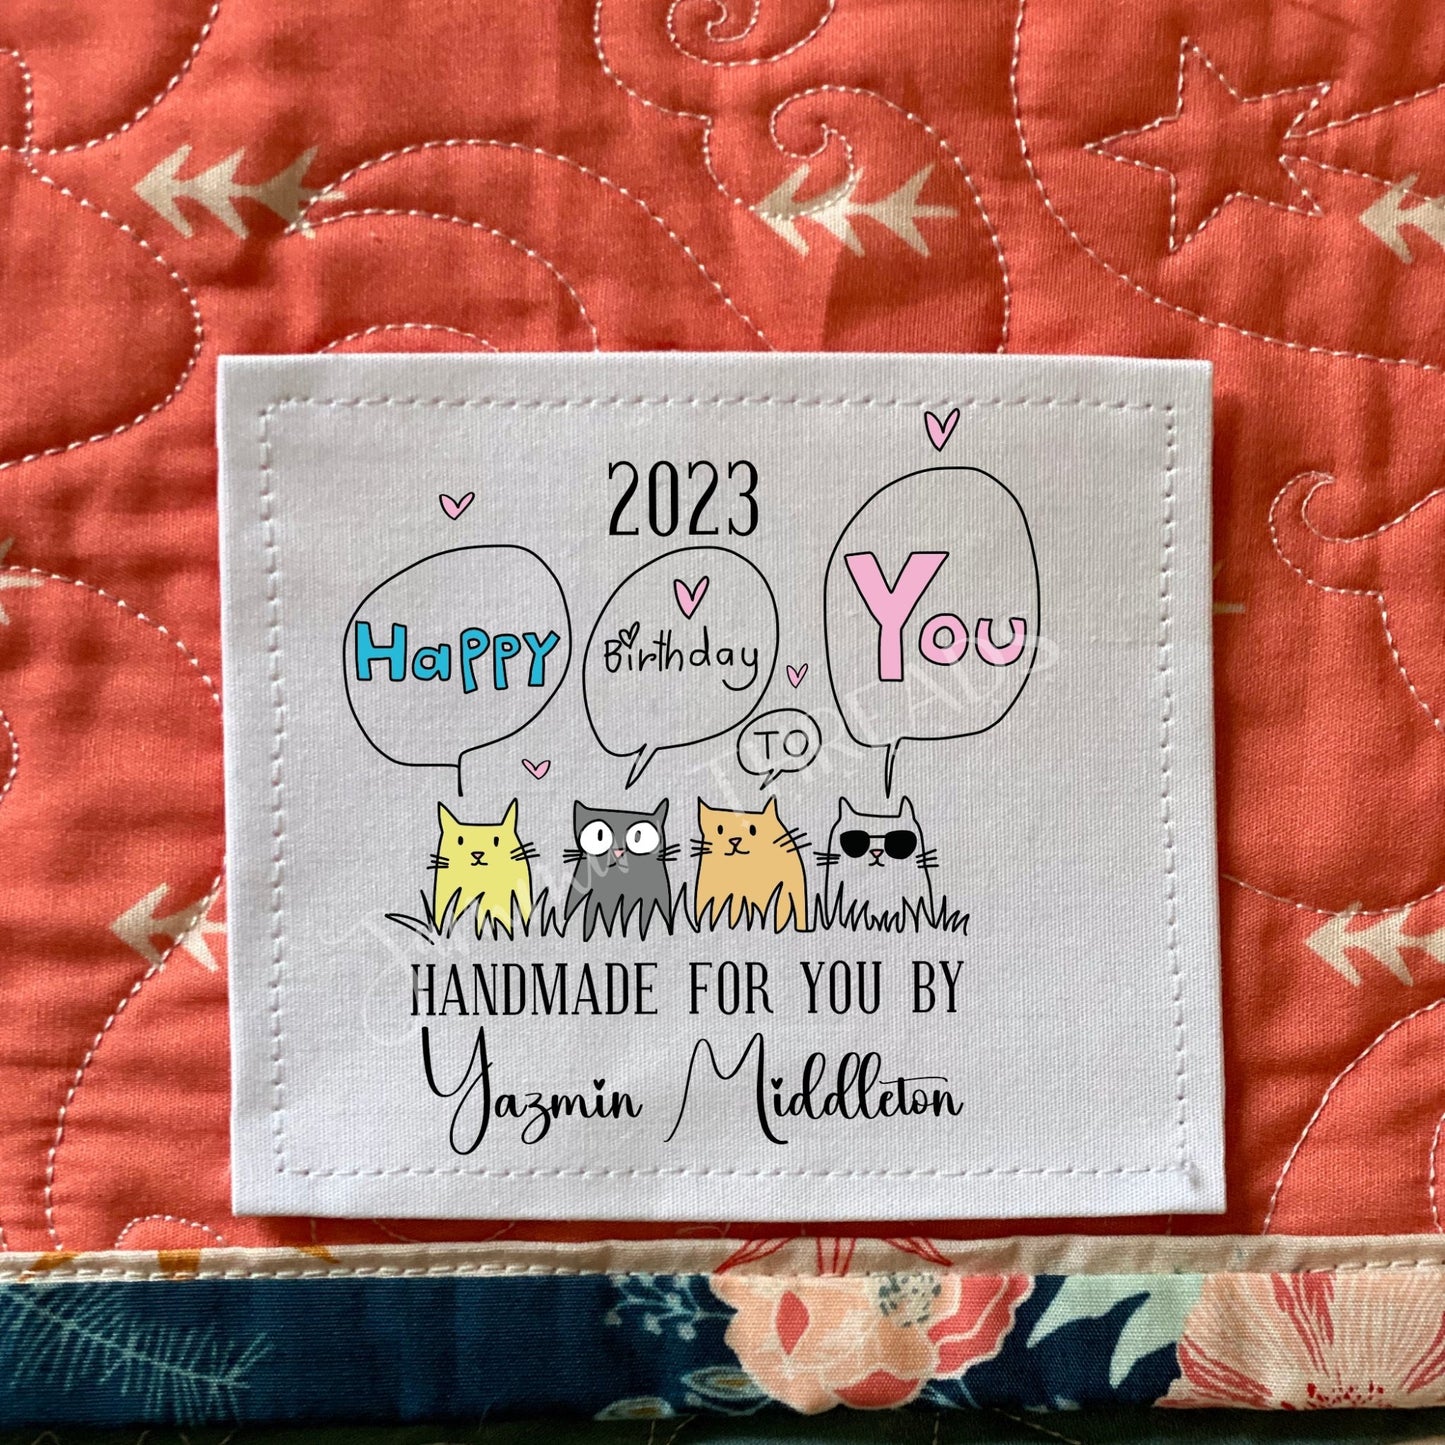 Happy Birthday to You - Personalized Birthday Quilt Labels - Jammin Threads